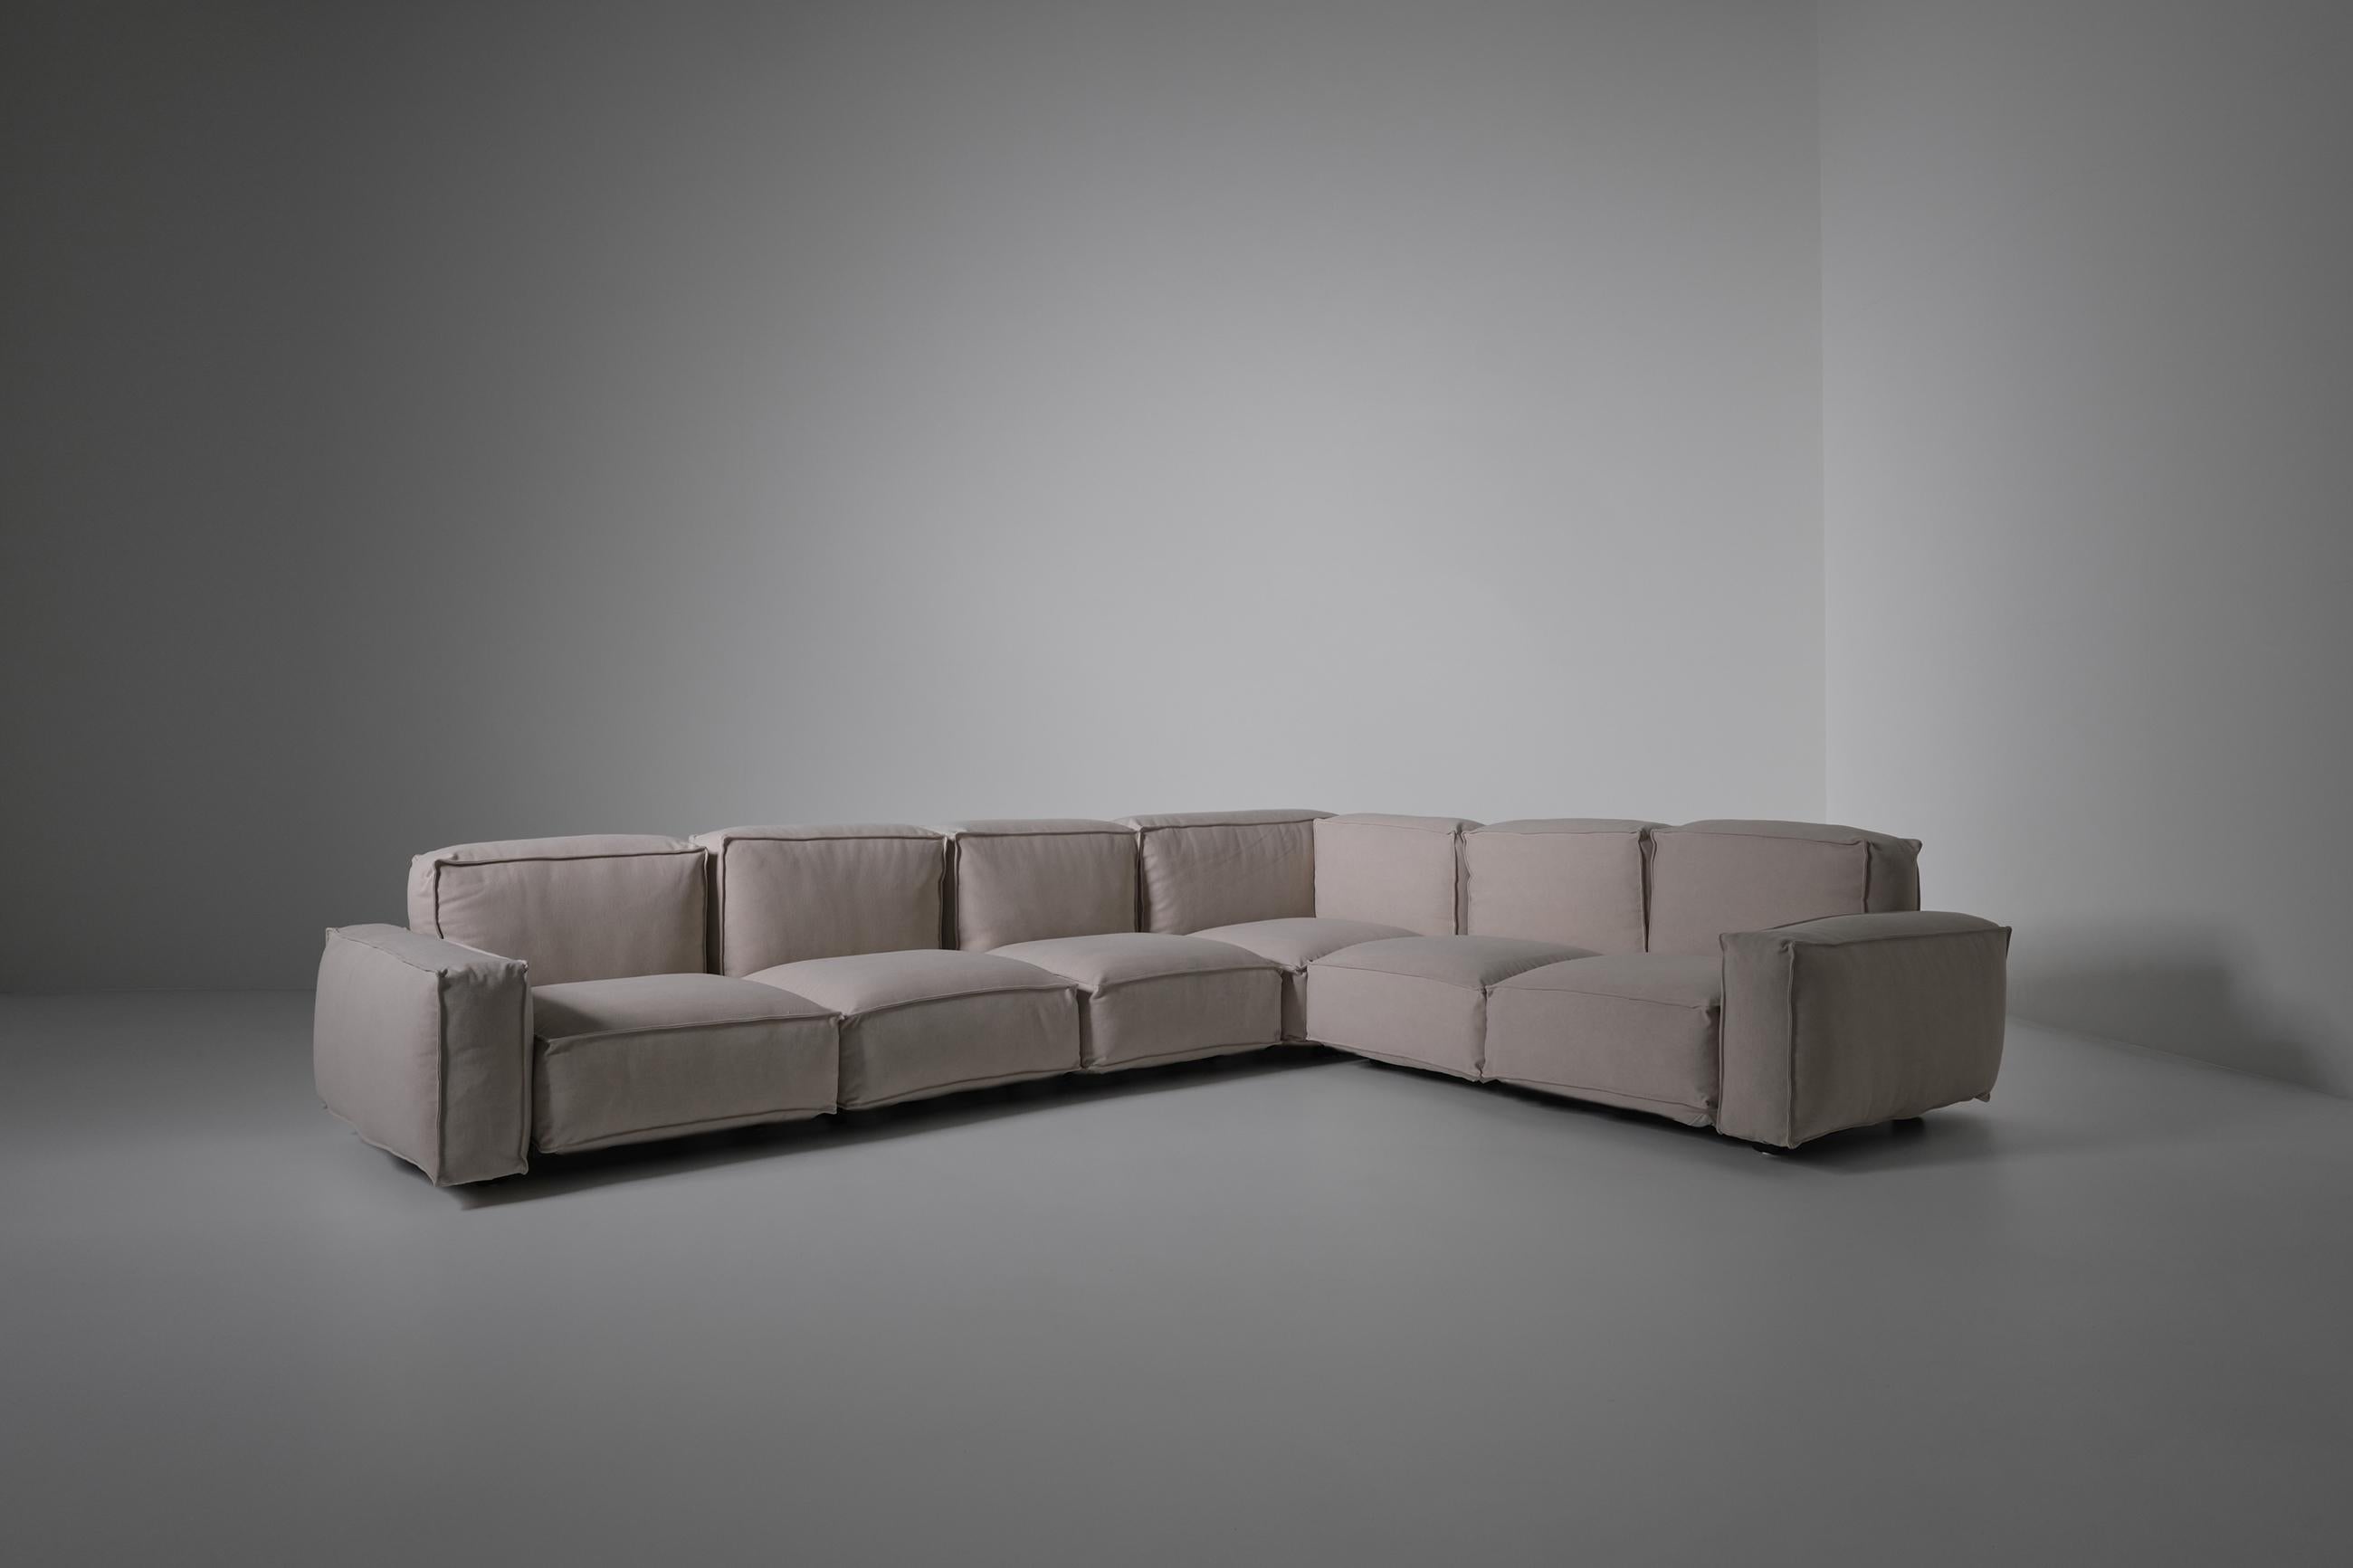 Large corner sofa by Mario Marenco for Arflex, Italy 1970s. A very comfortable sofa consisting out of six modular elements which allow a large variety of different combinations. Mario Marenco came with this revolutionair design of metal frame where